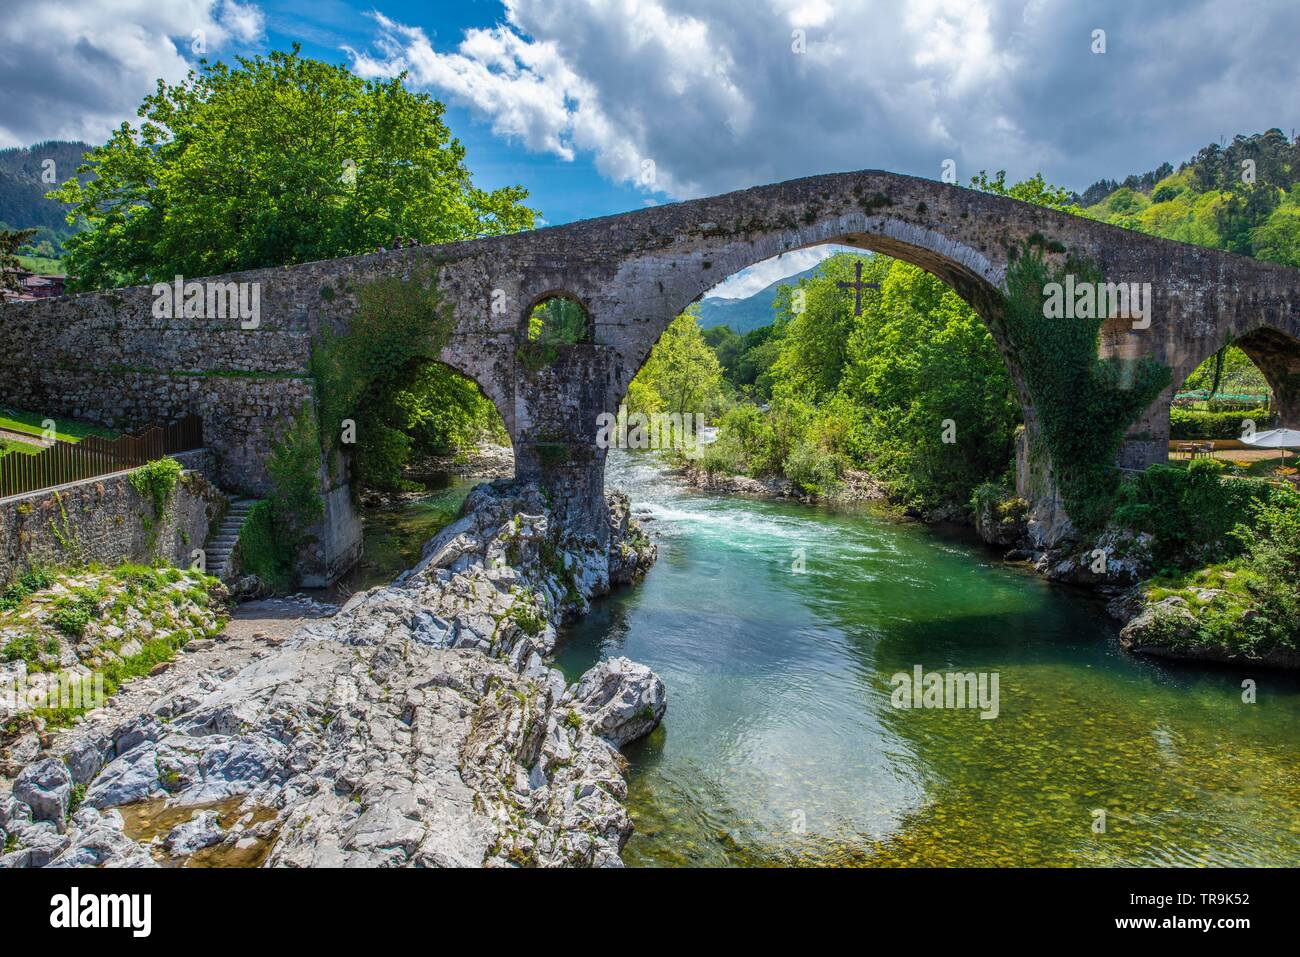 The stone bridge of Cangas de Onis in Asturia Spain dating back to the 14. century is the main tourist attraction Stock Photo